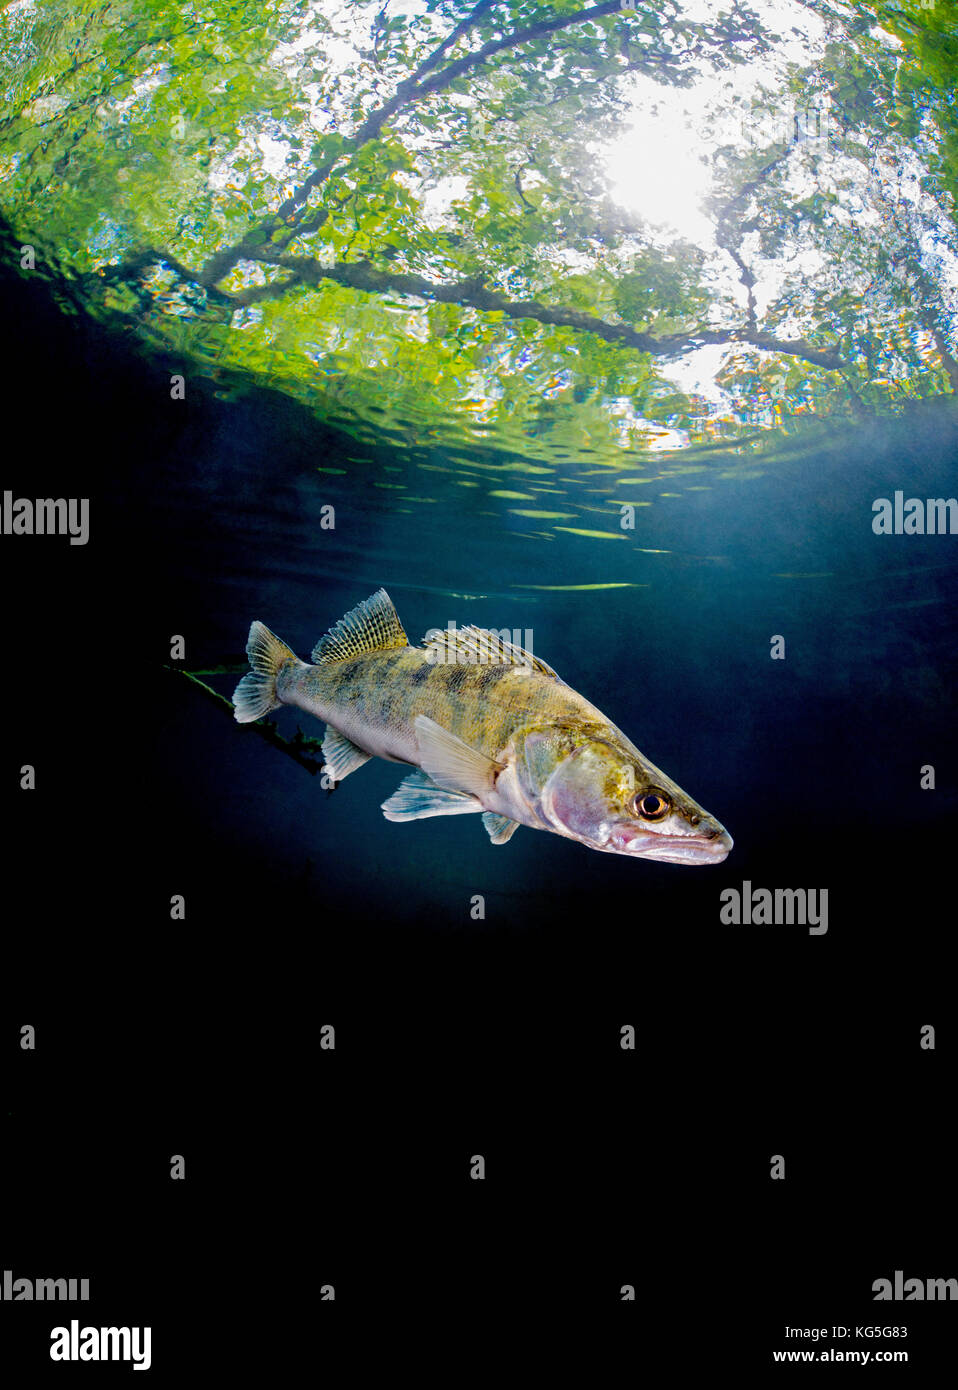 Pikeperch, Sander lucioperca, lake, water surface Stock Photo